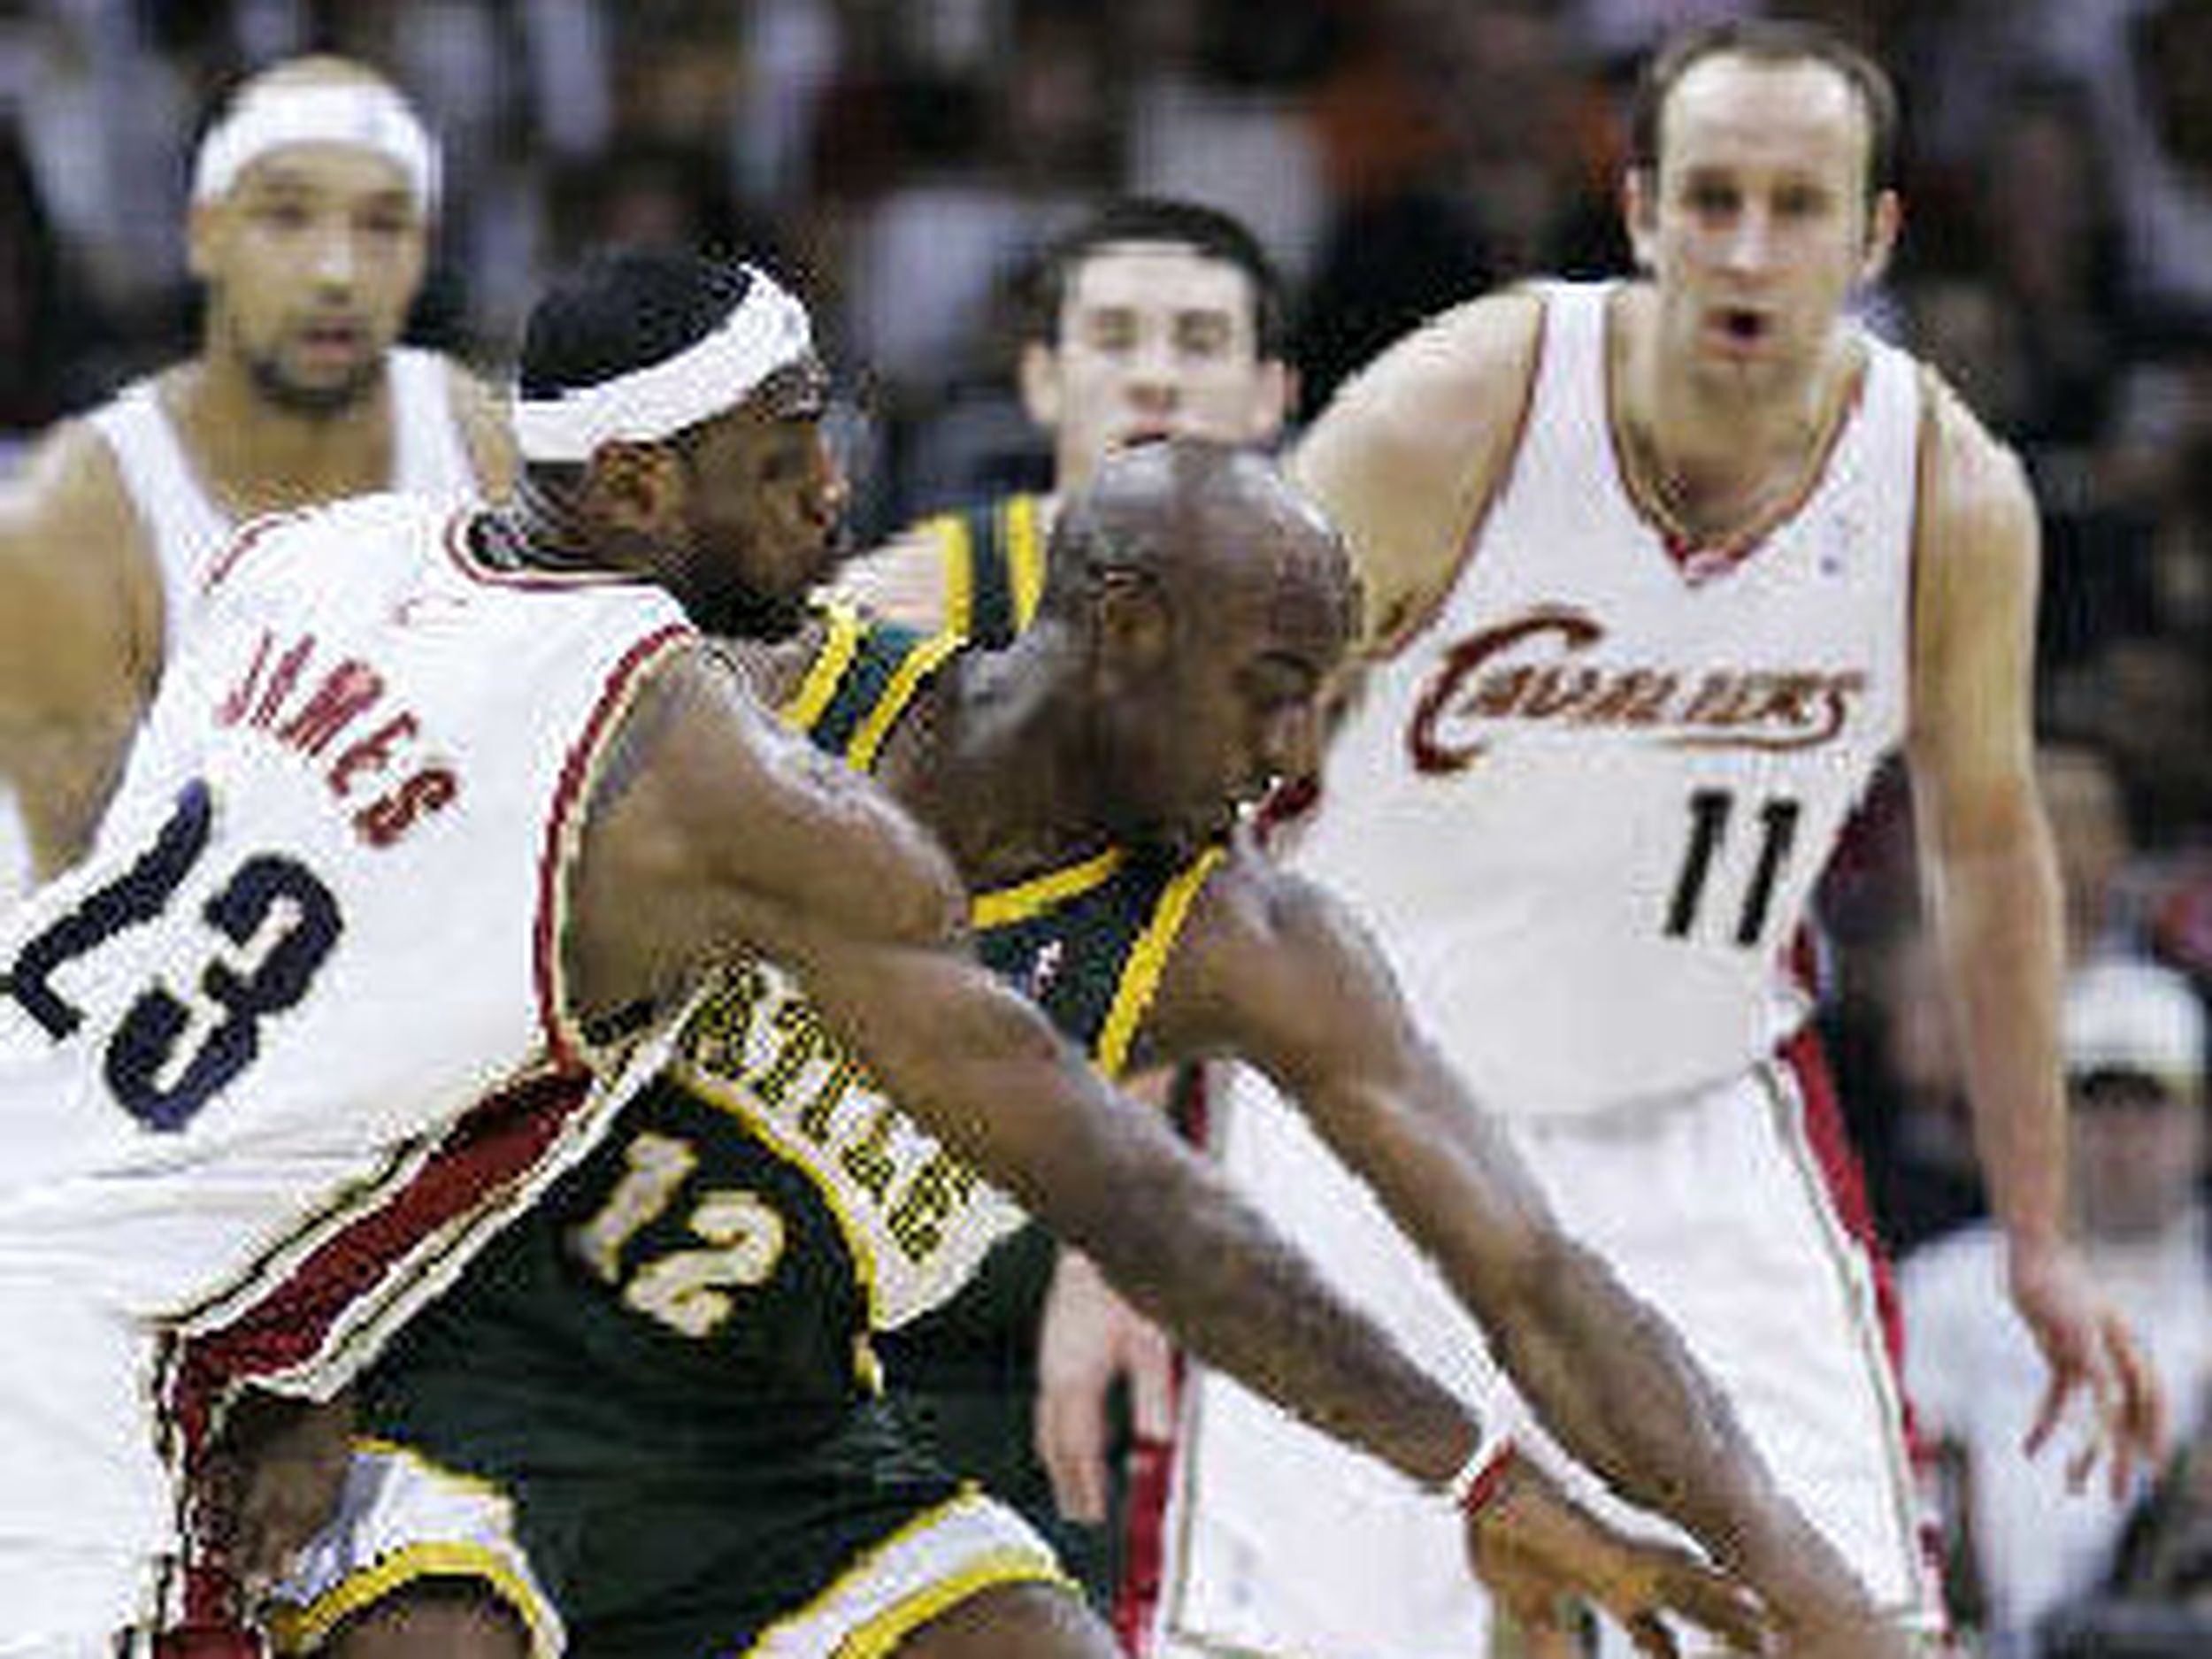 Ray Allen isn't what LeBron James' Cavaliers need now